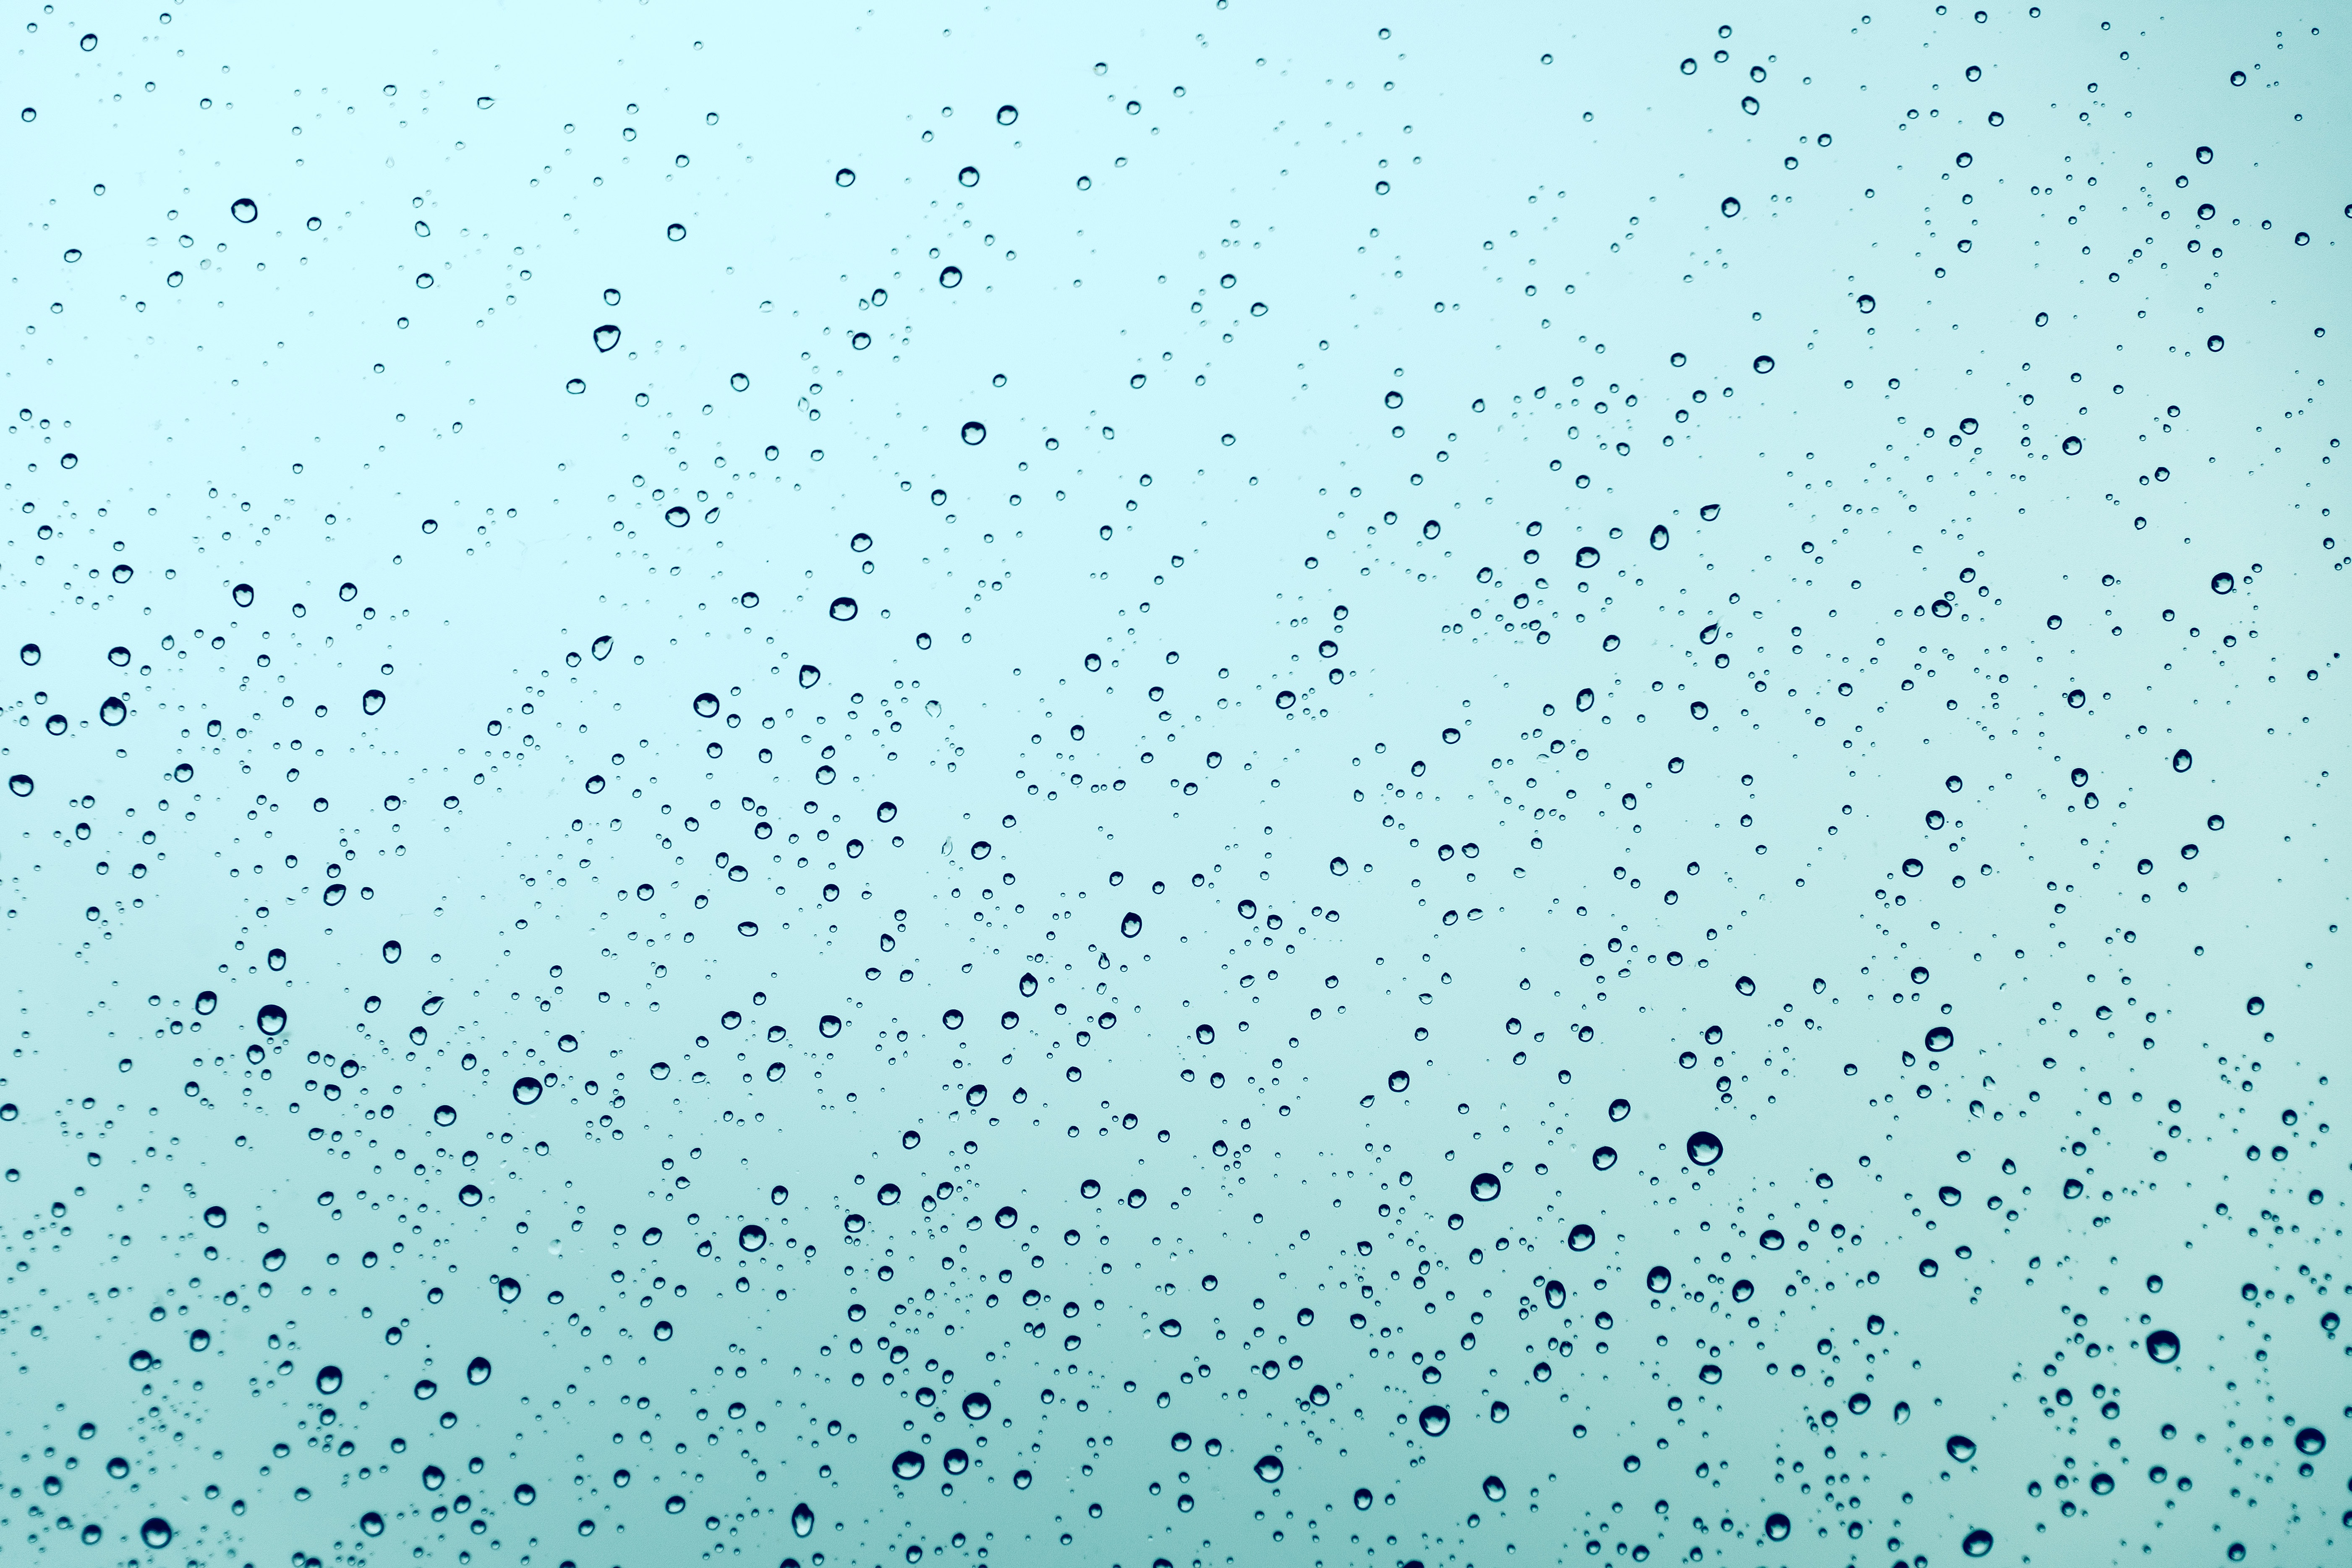 Droplets on an azure background